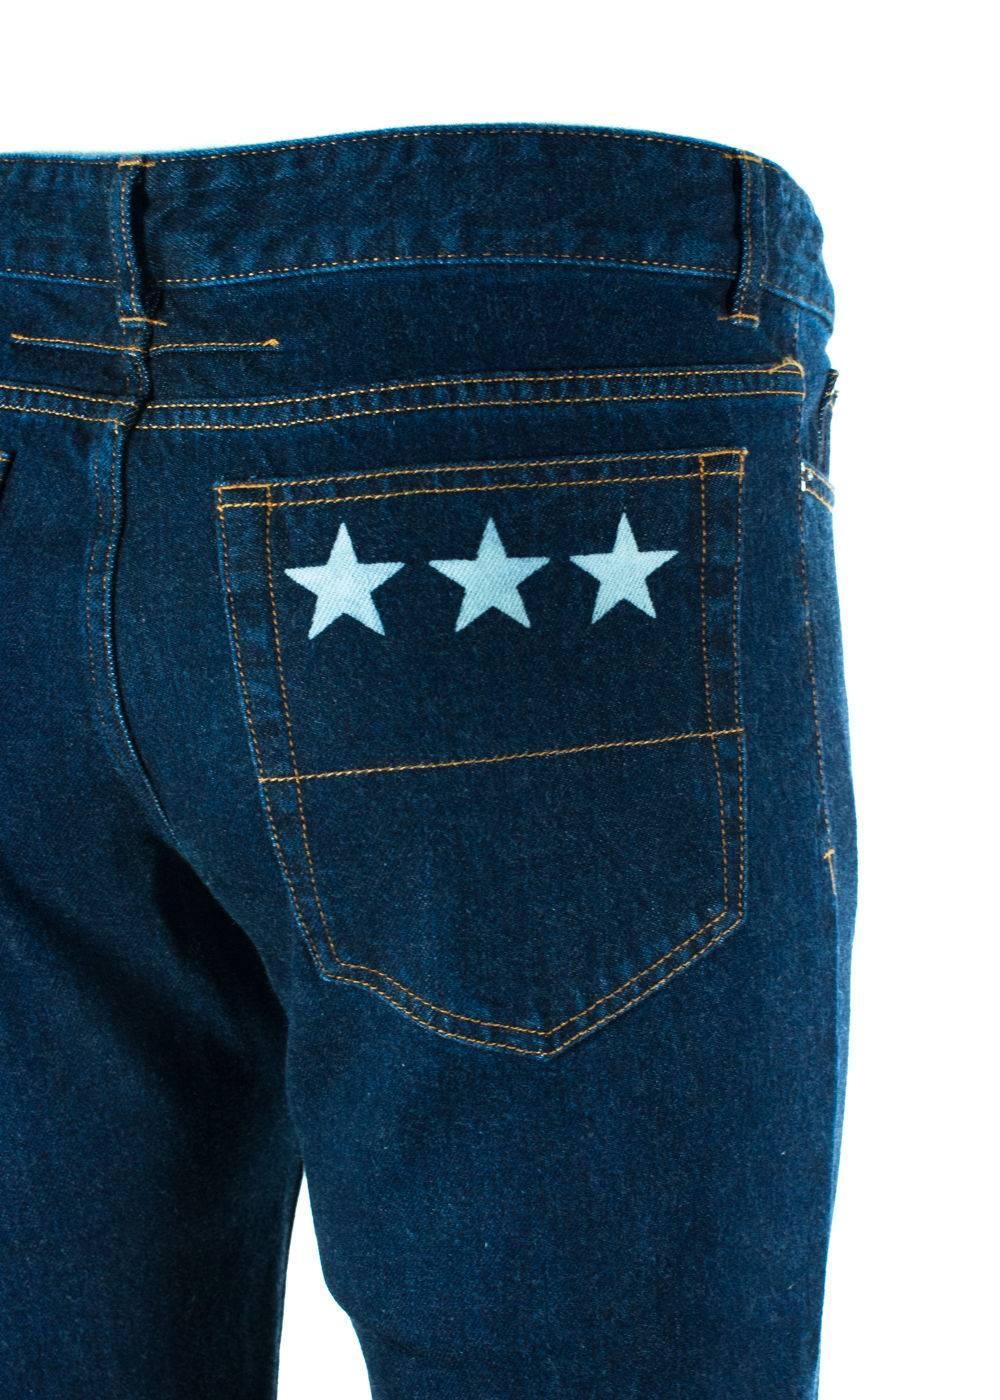 Givenchy Men's Medium Blue W/ Star Accent Denim Jeans  In New Condition For Sale In Brooklyn, NY